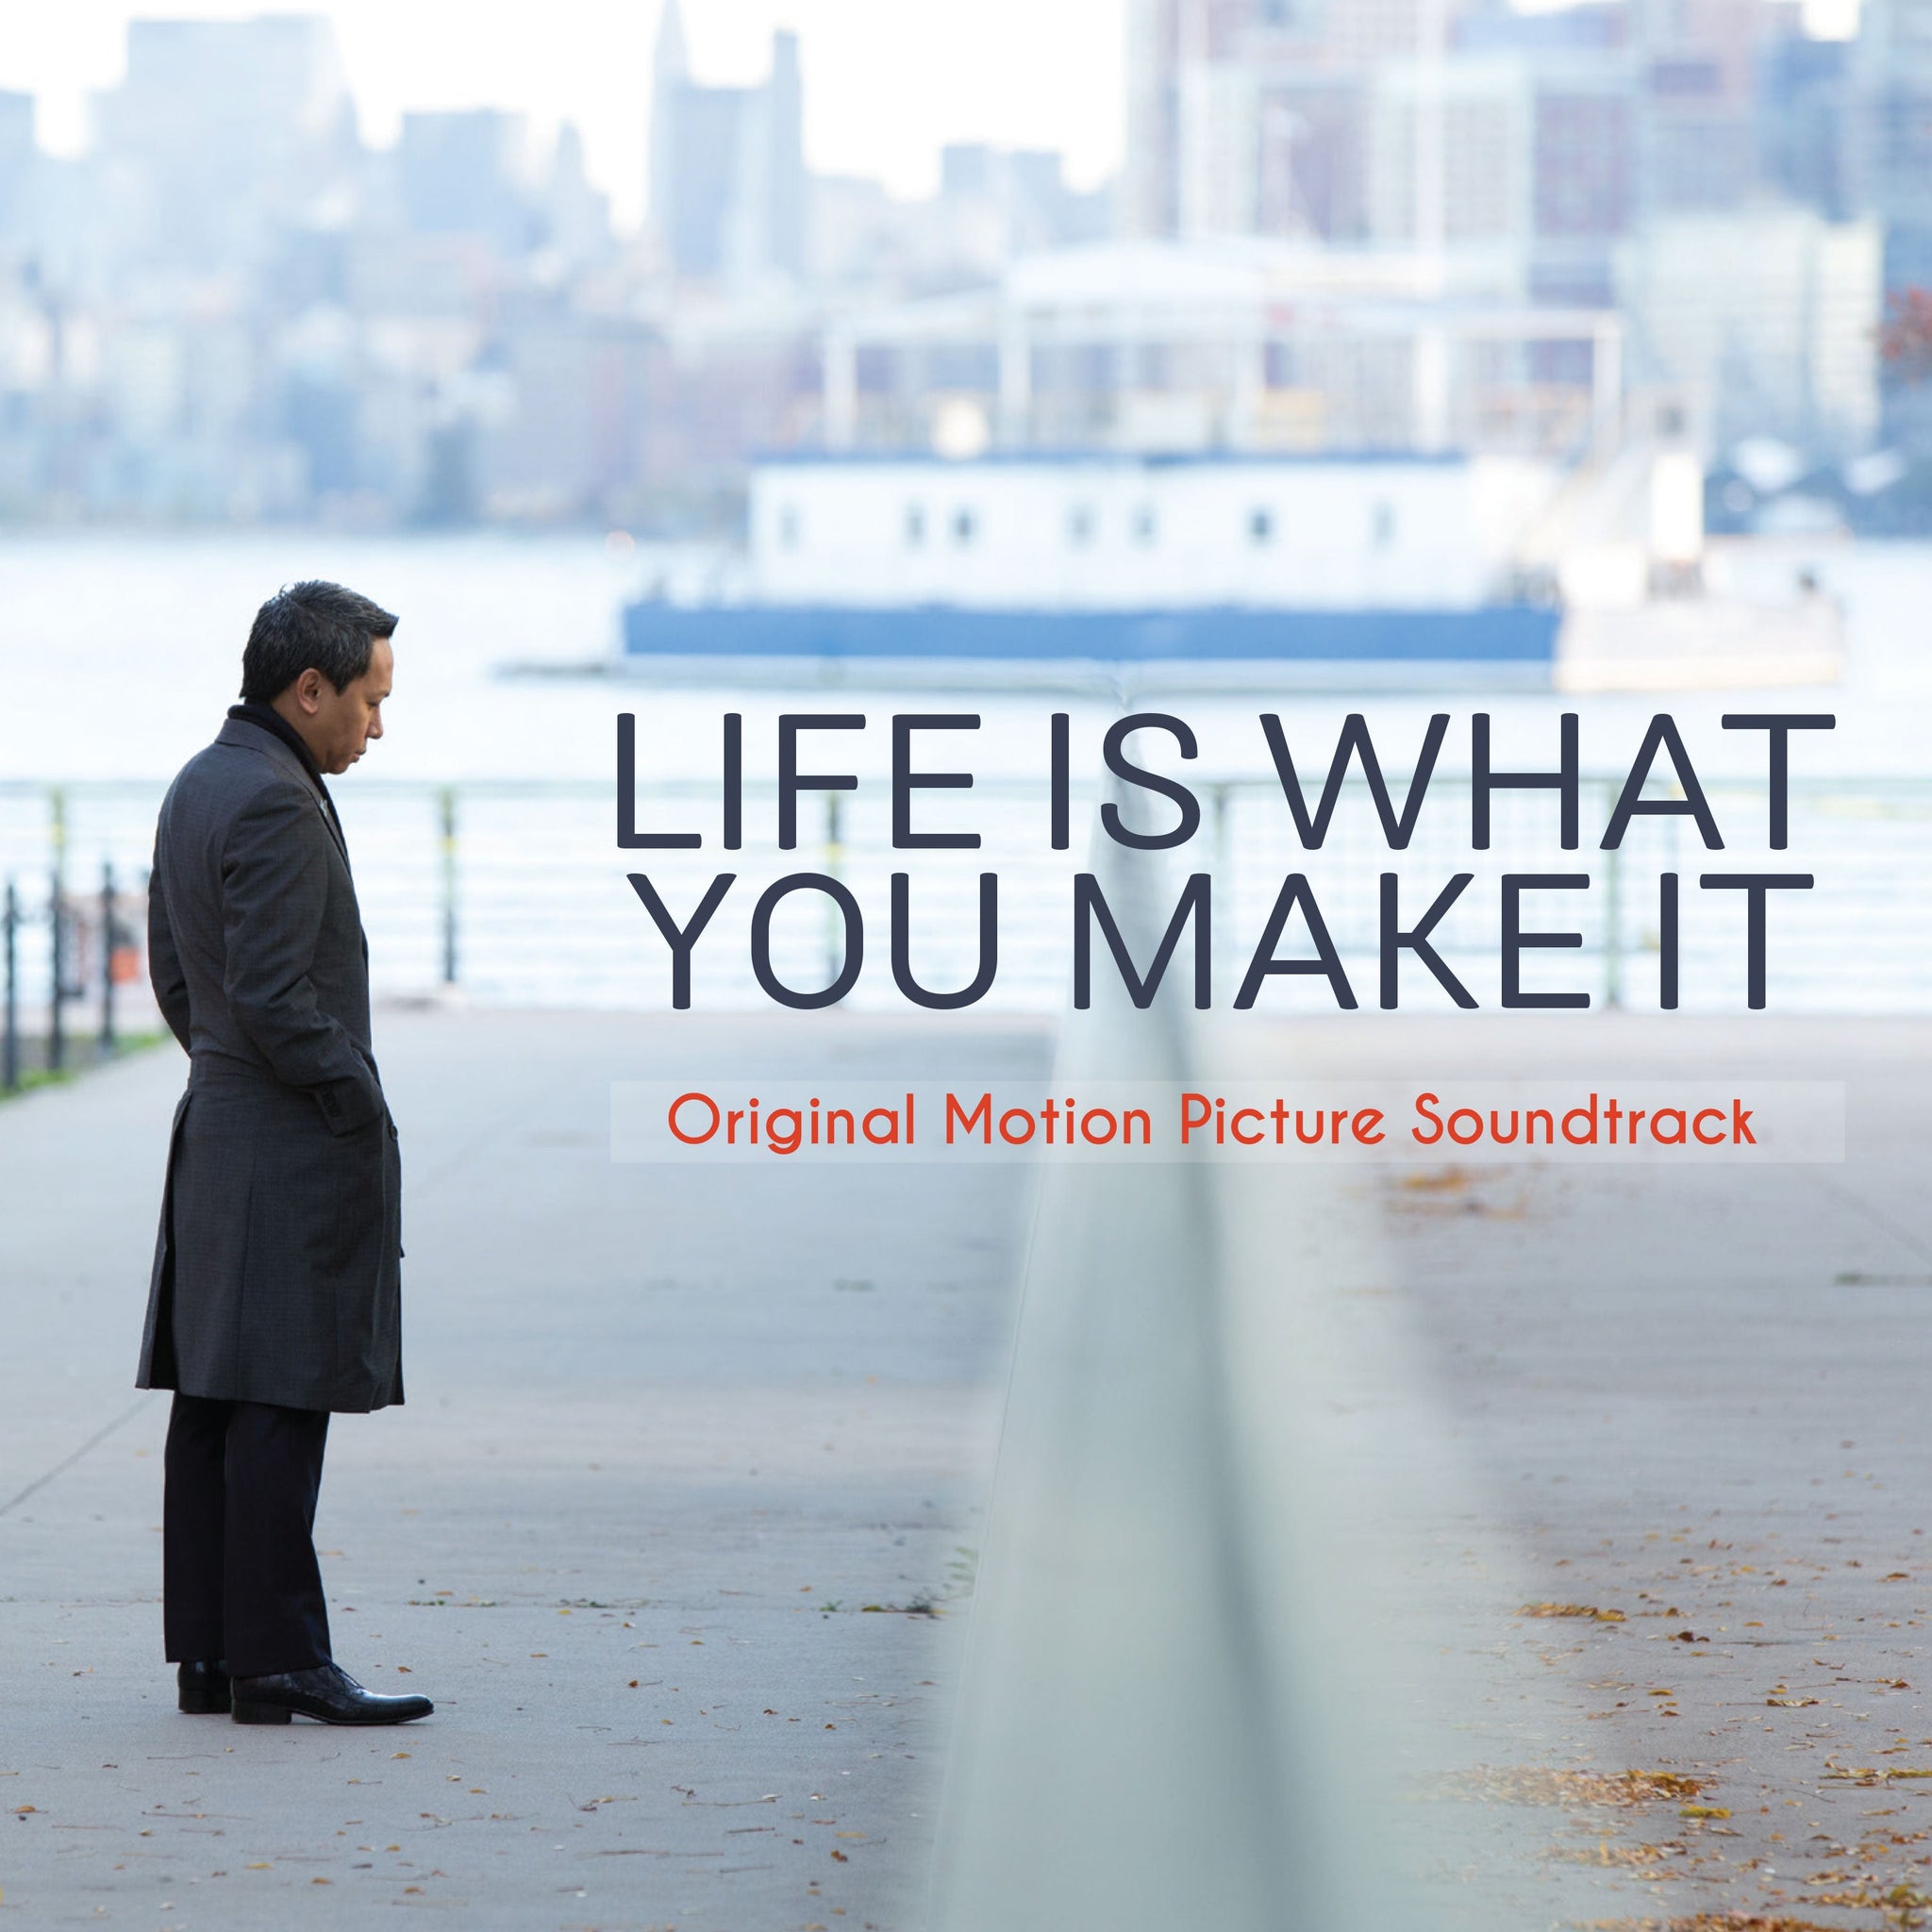 Life Is What You Make It (Original Motion Picture Soundtrack) [MP3]